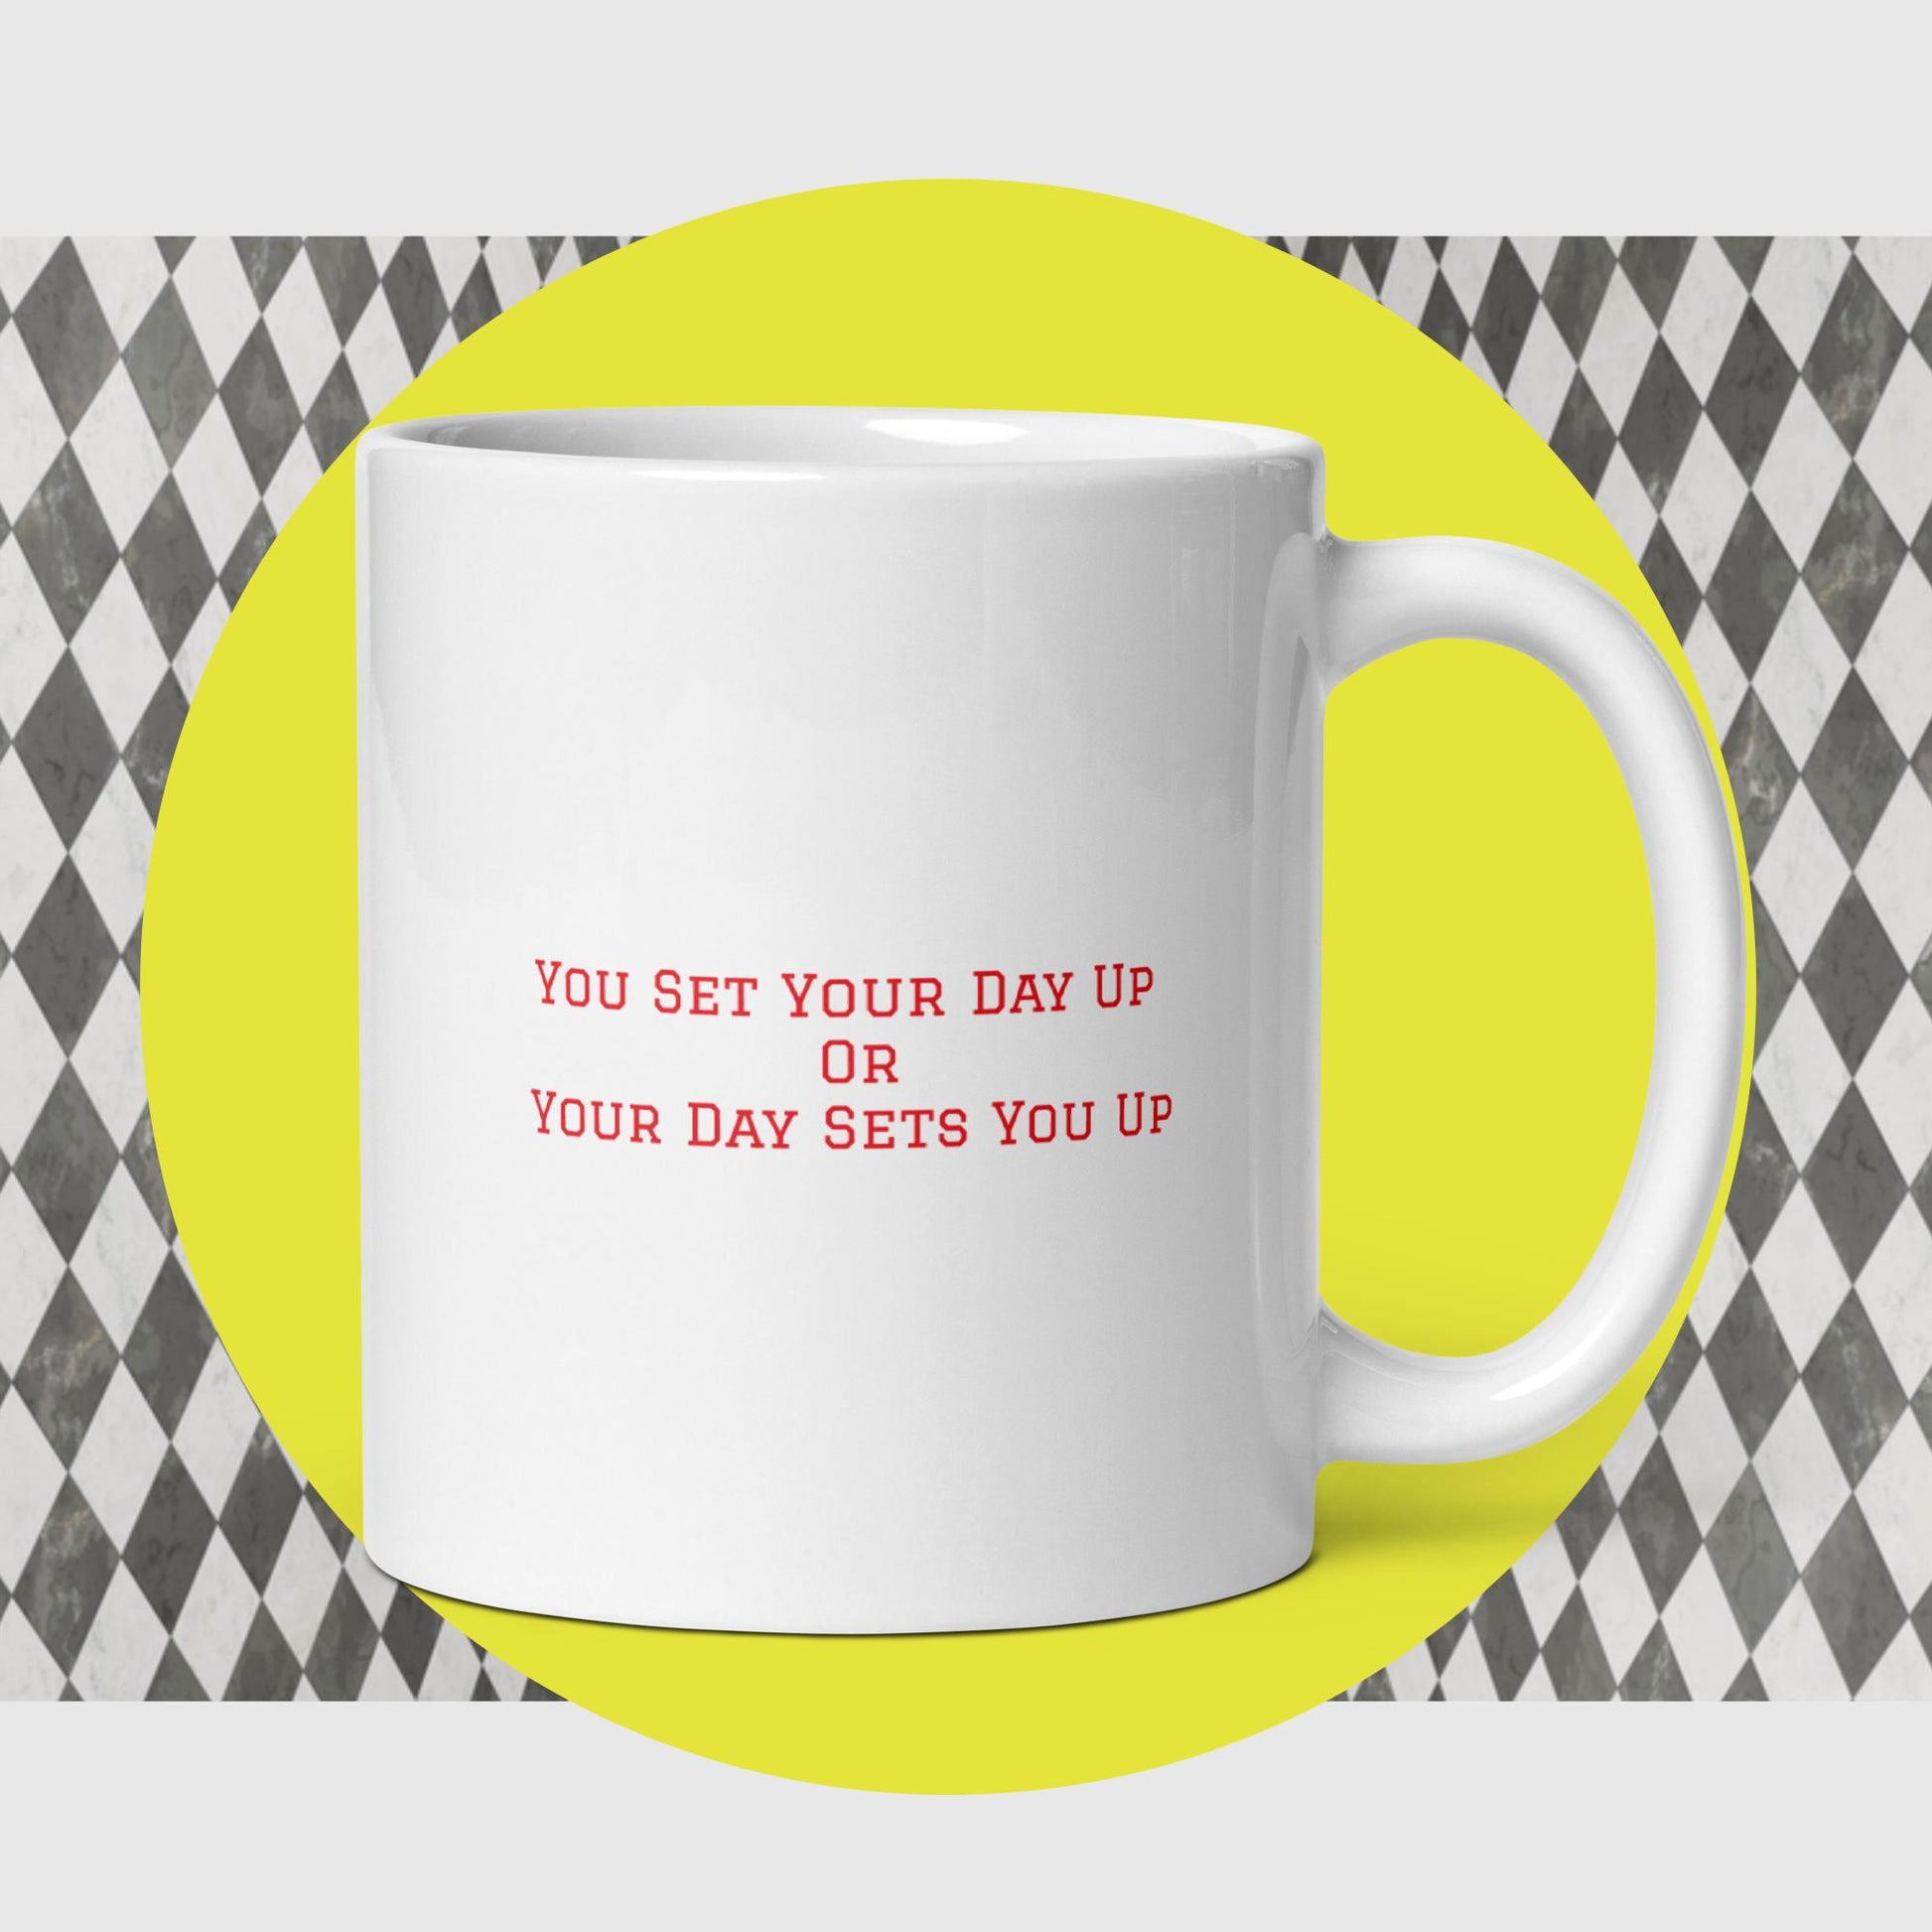 White mug says "You Set Your Day Up Or Your Day Sets You Up" in red 